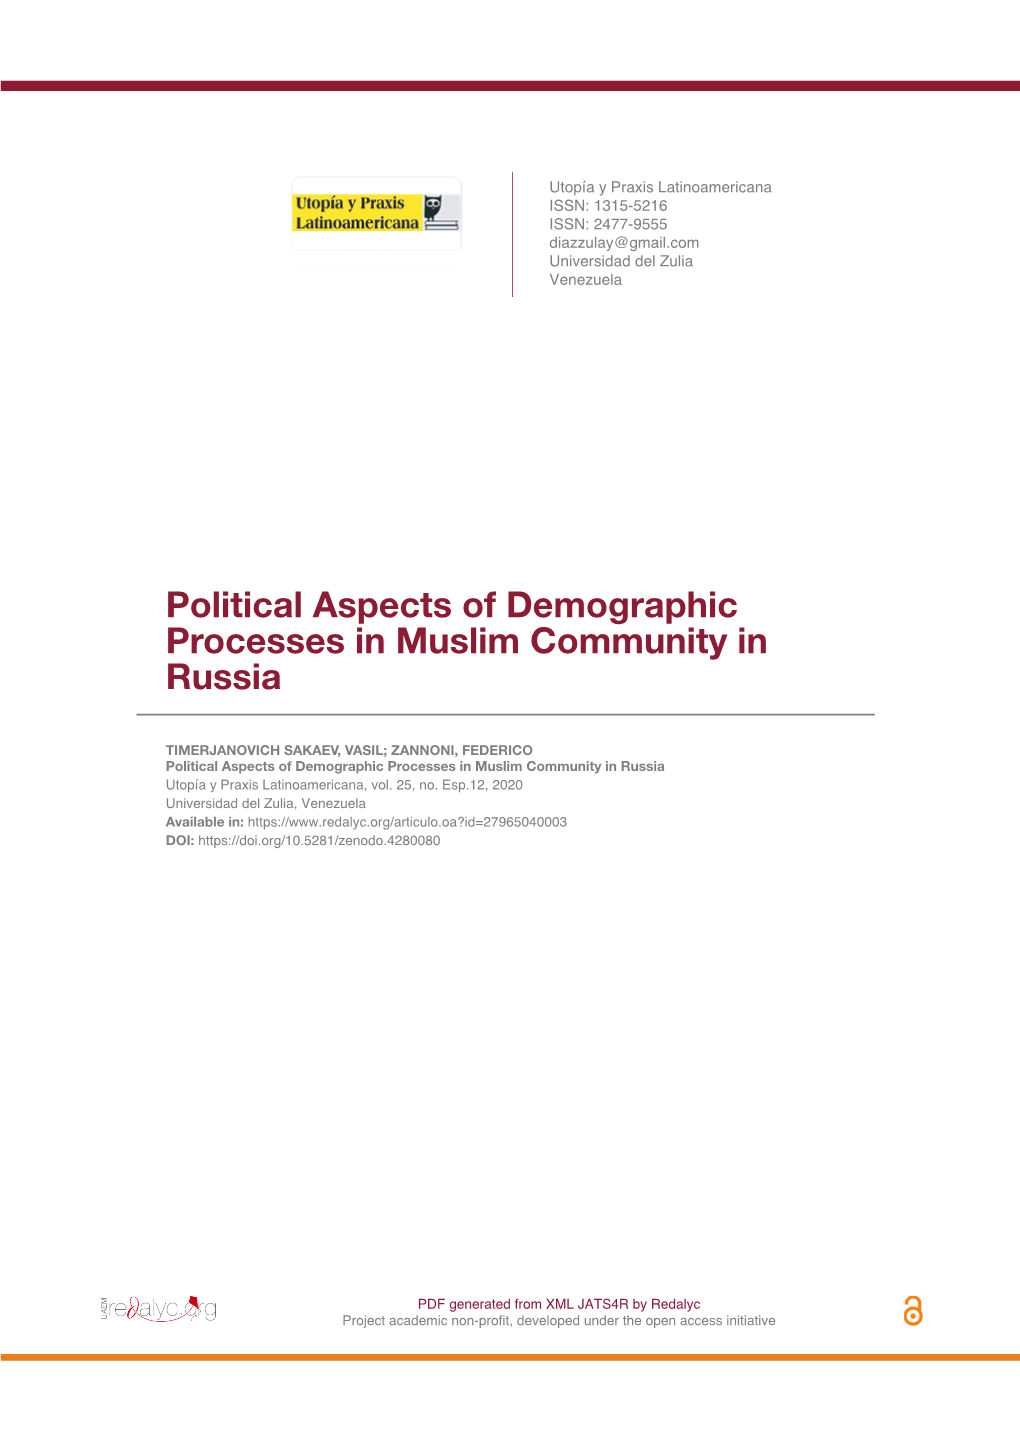 Political Aspects of Demographic Processes in Muslim Community in Russia